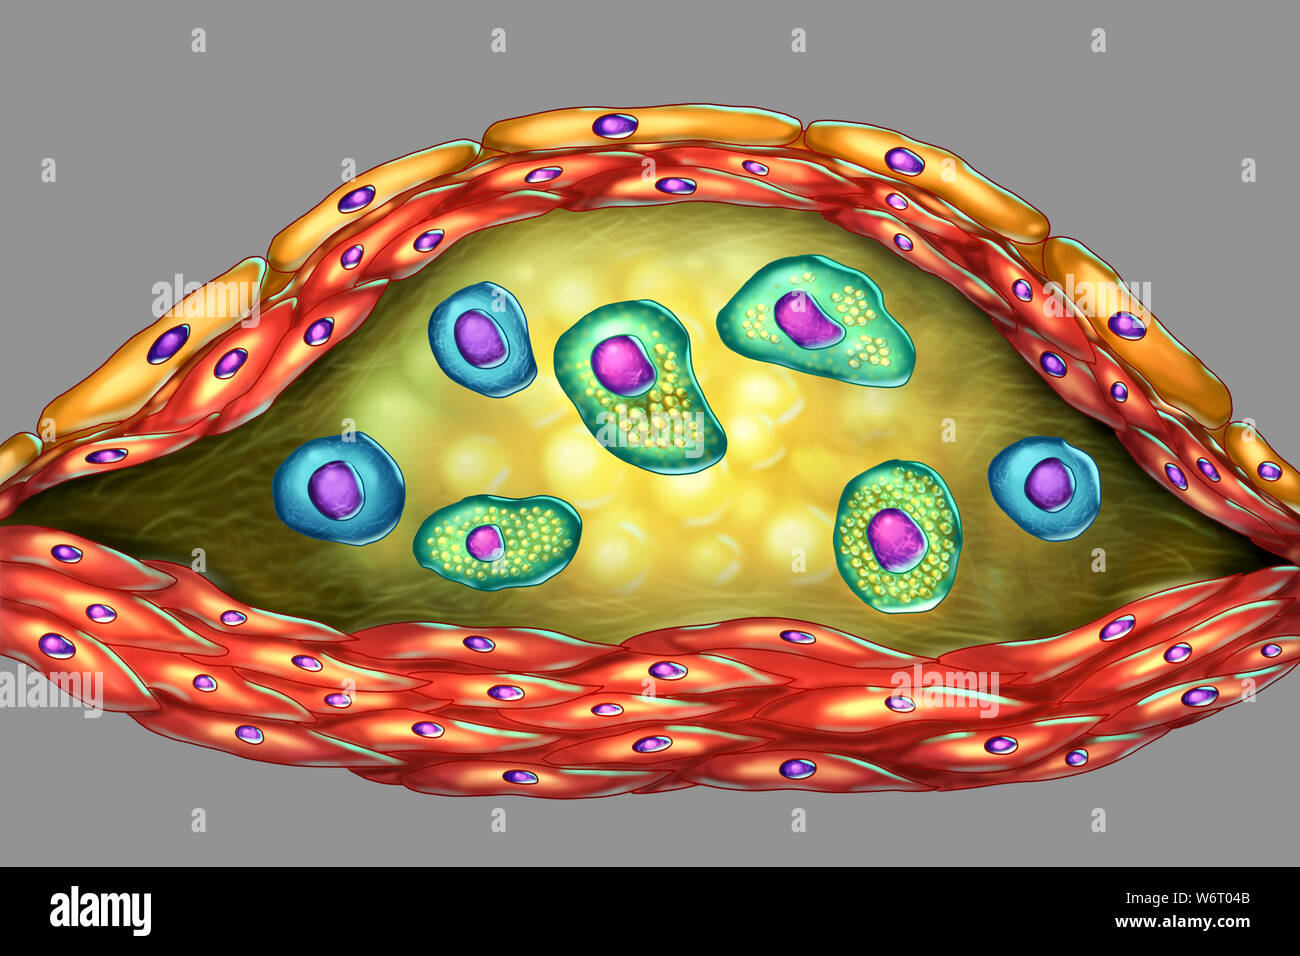 Structure of atherosclerotic plaque, computer illustration. The necrotic centre, foam cells and T-lymphocytes are seen inside of the cholesterol plaque. The walls are made of smooth muscle cells and endothelium from the blood vessel. Stock Photo